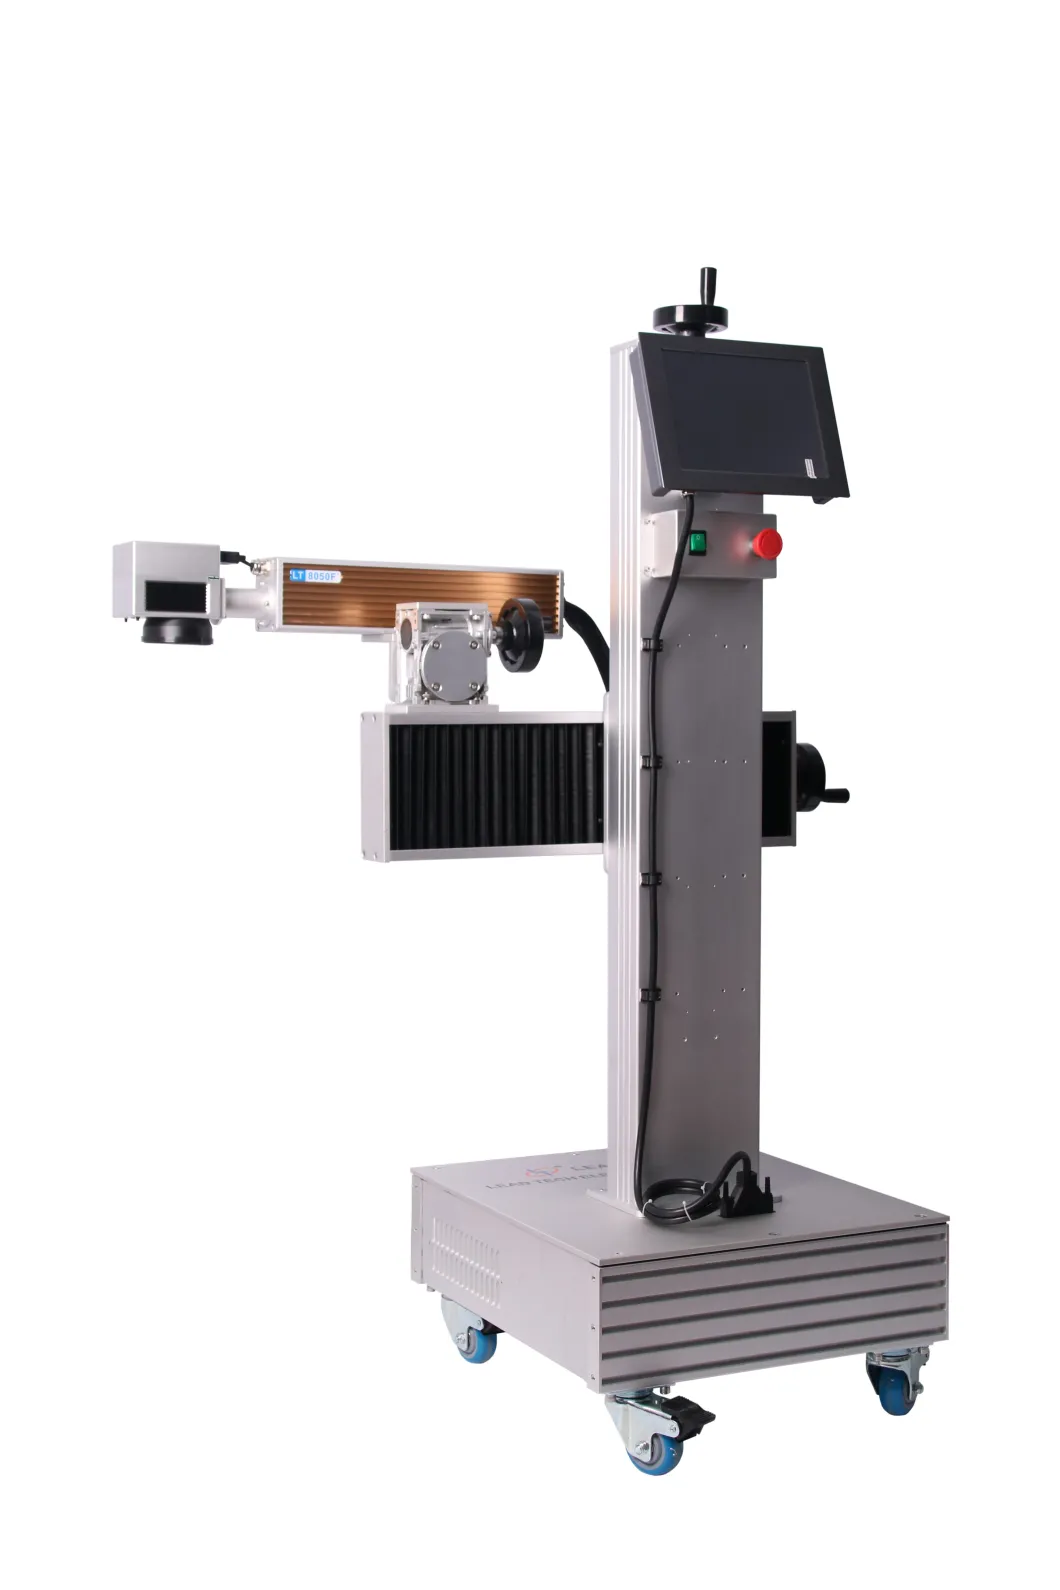 LEAD TECH New laser marking machine working principle easy-operated for pipe printing-1